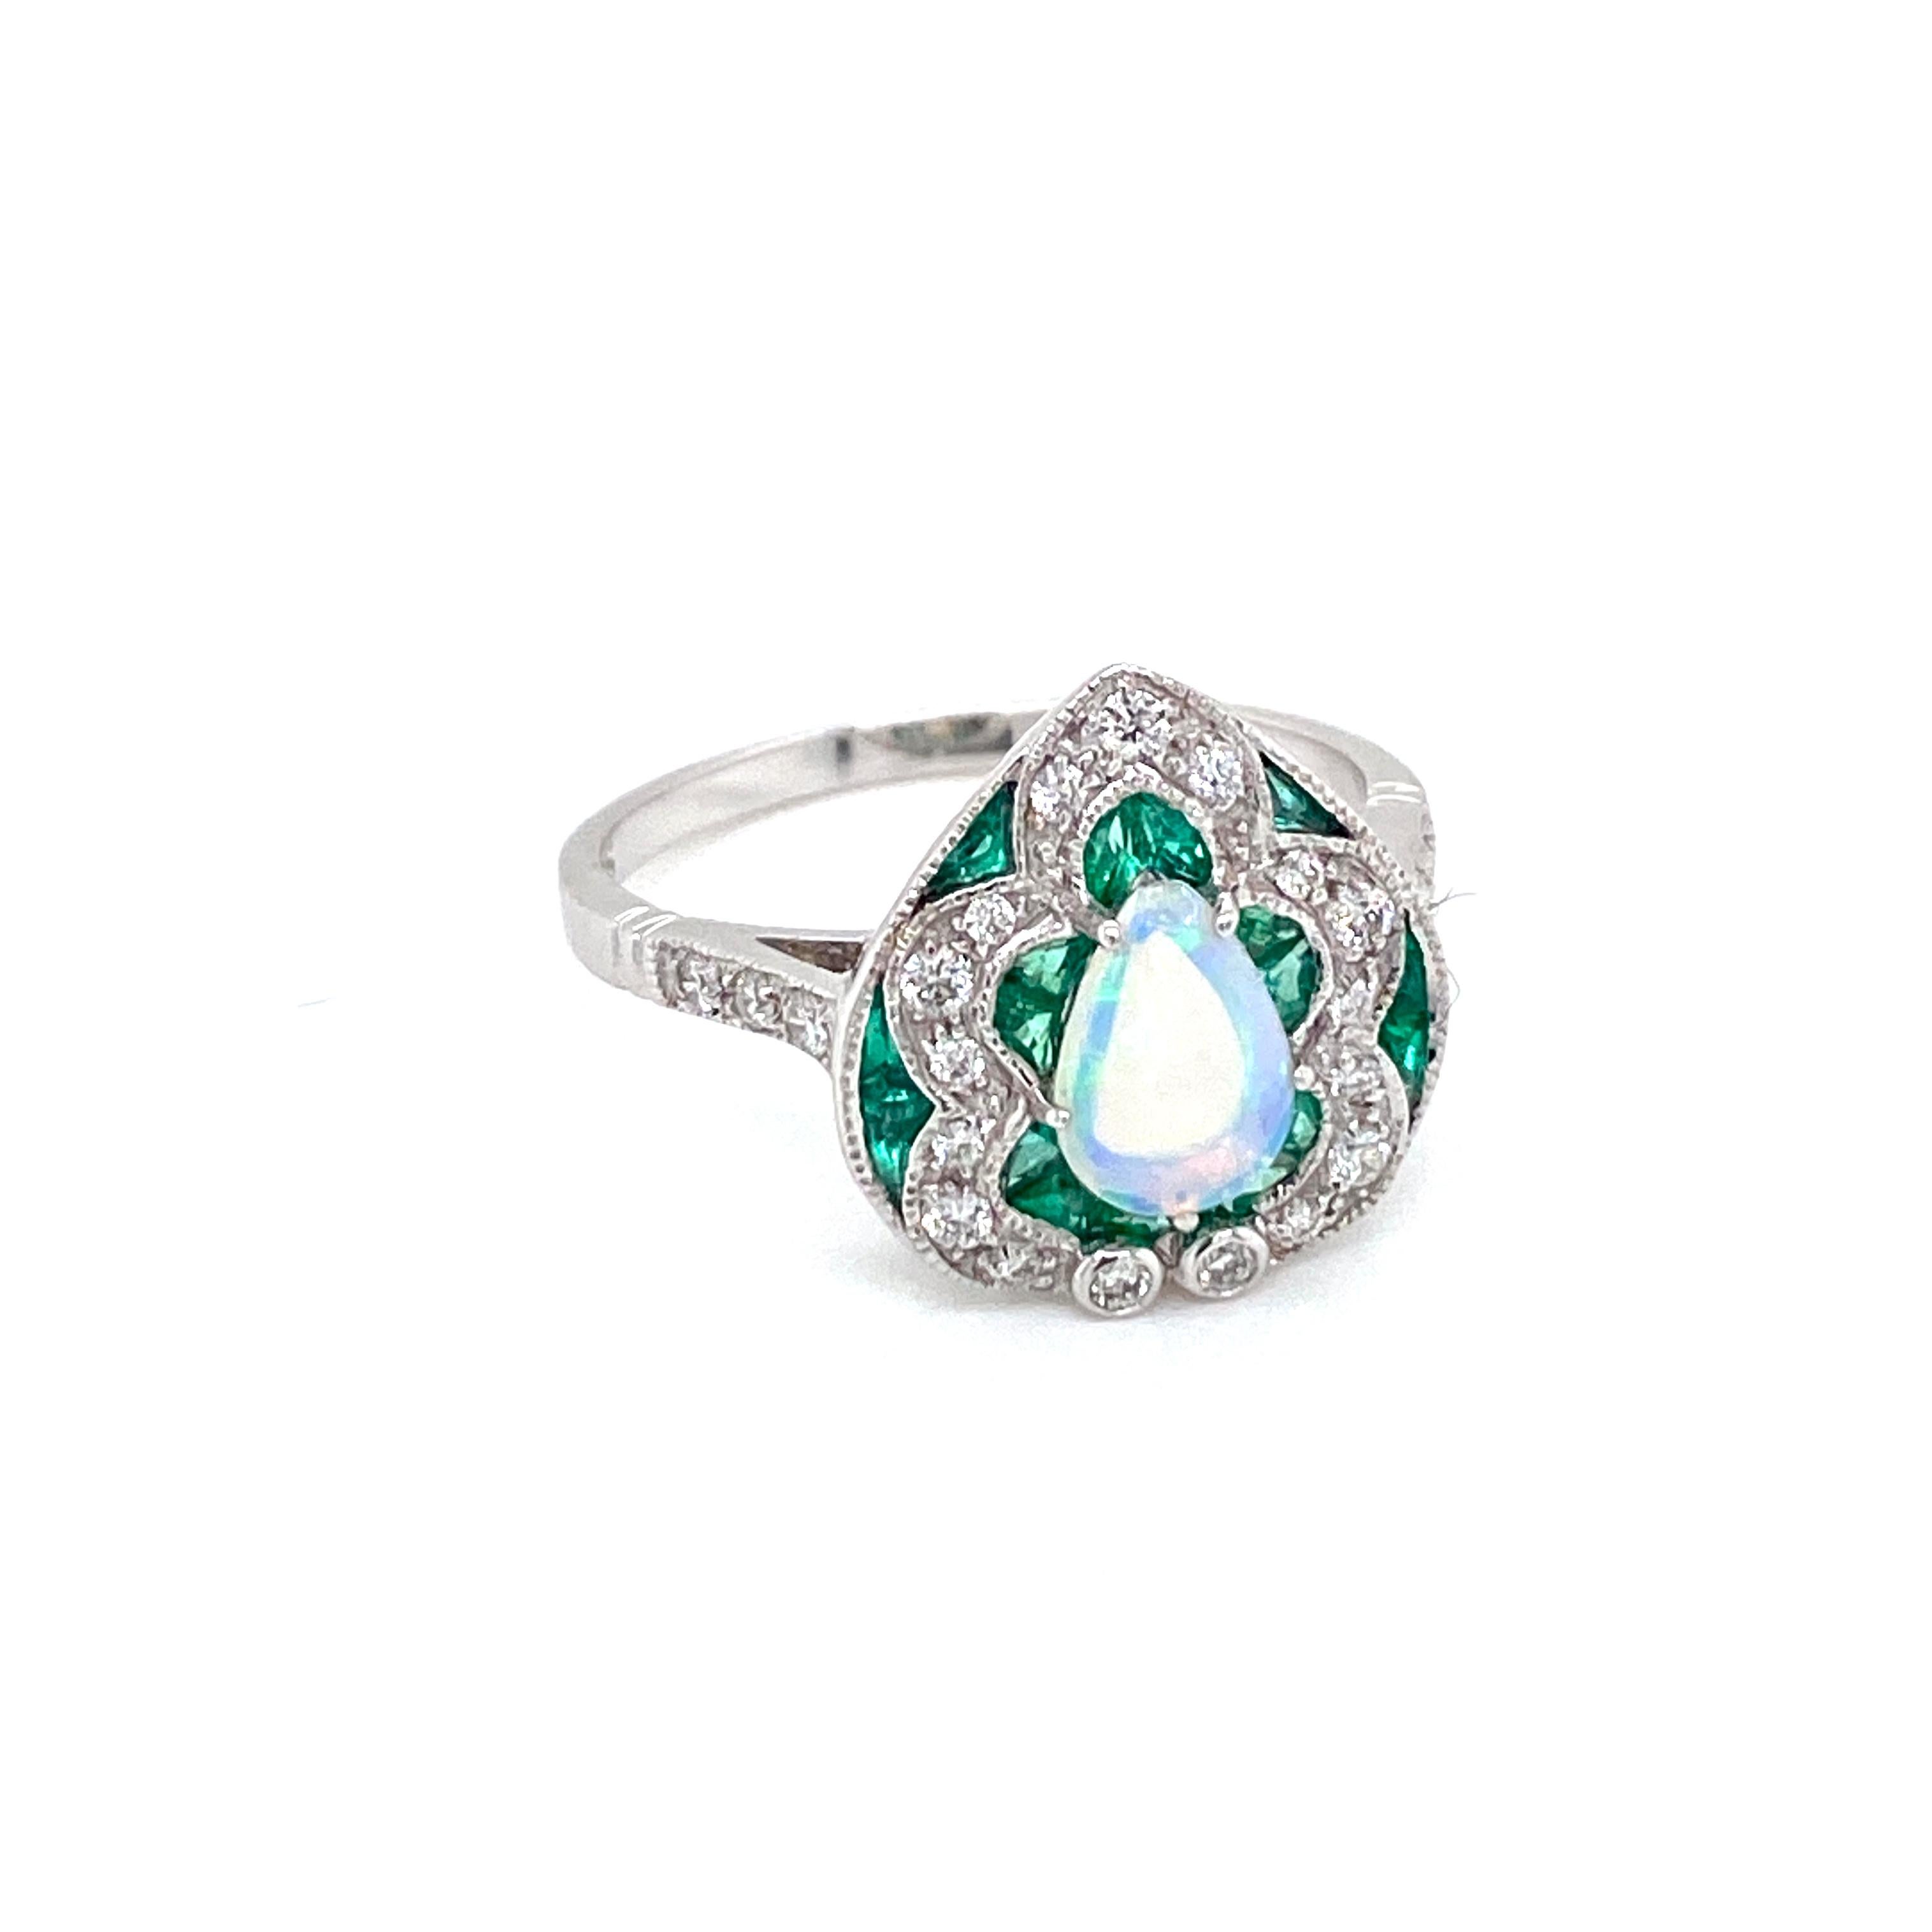 Beautiful Gold handmade Art Deco style ring.
It is set in 14k white Gold featuring a large sparkling vivid Opal in the center, weight 0,50 ct., surrounded by 0,60 ct. custom cut natural fine Emeralds and Round brilliant cut diamonds totaling 0.40